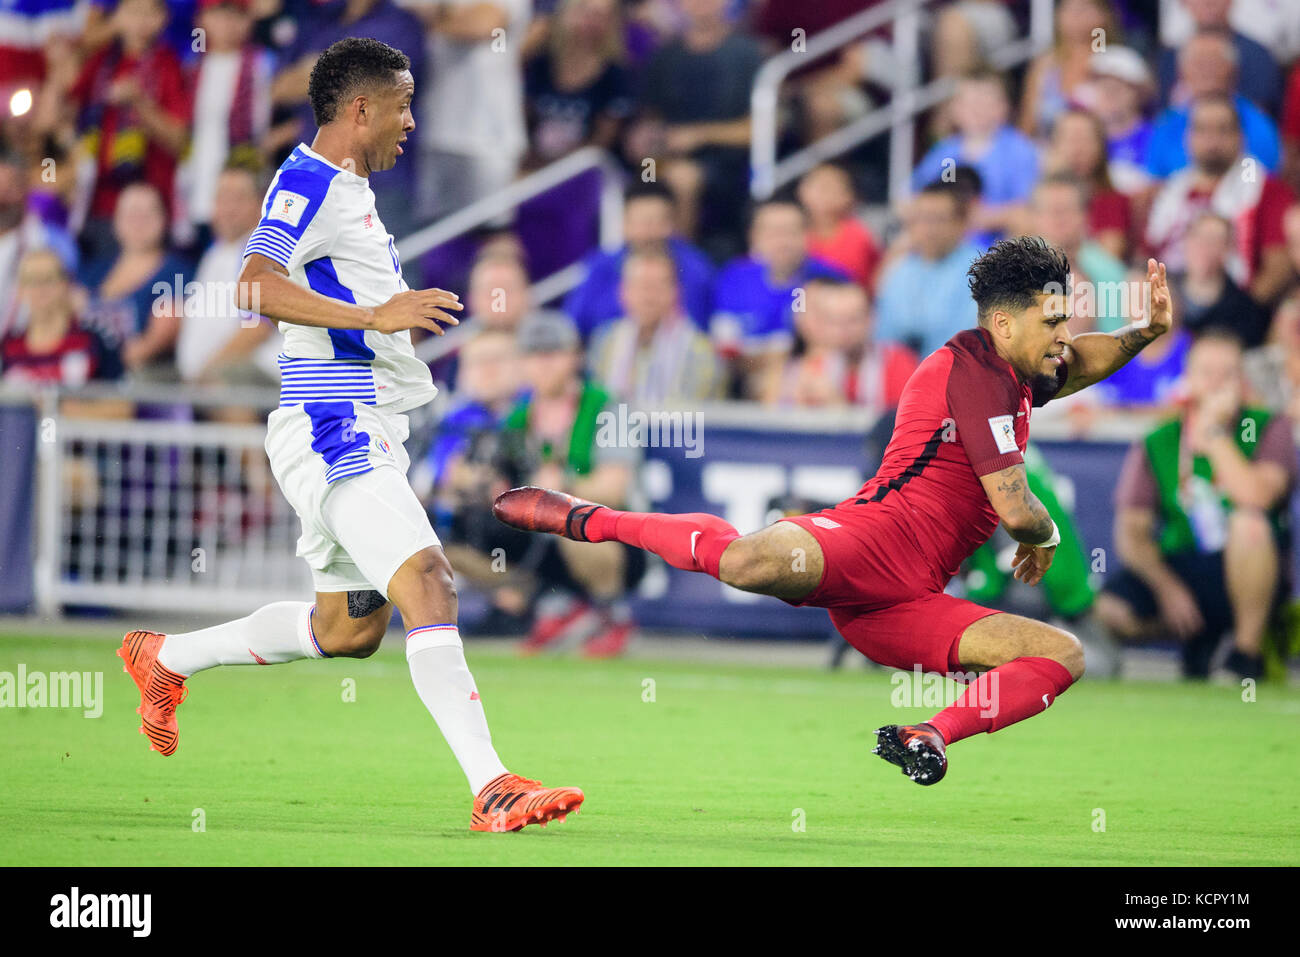 Orlando, USA. 6th Oct, 2017. United States Defender DeAndre Yedlin (2) during the Men's International Soccer World Cup Qualifier match between Panama and the United States at Orlando City Stadium in Orlando, FL. Credit: Cal Sport Media/Alamy Live News Stock Photo